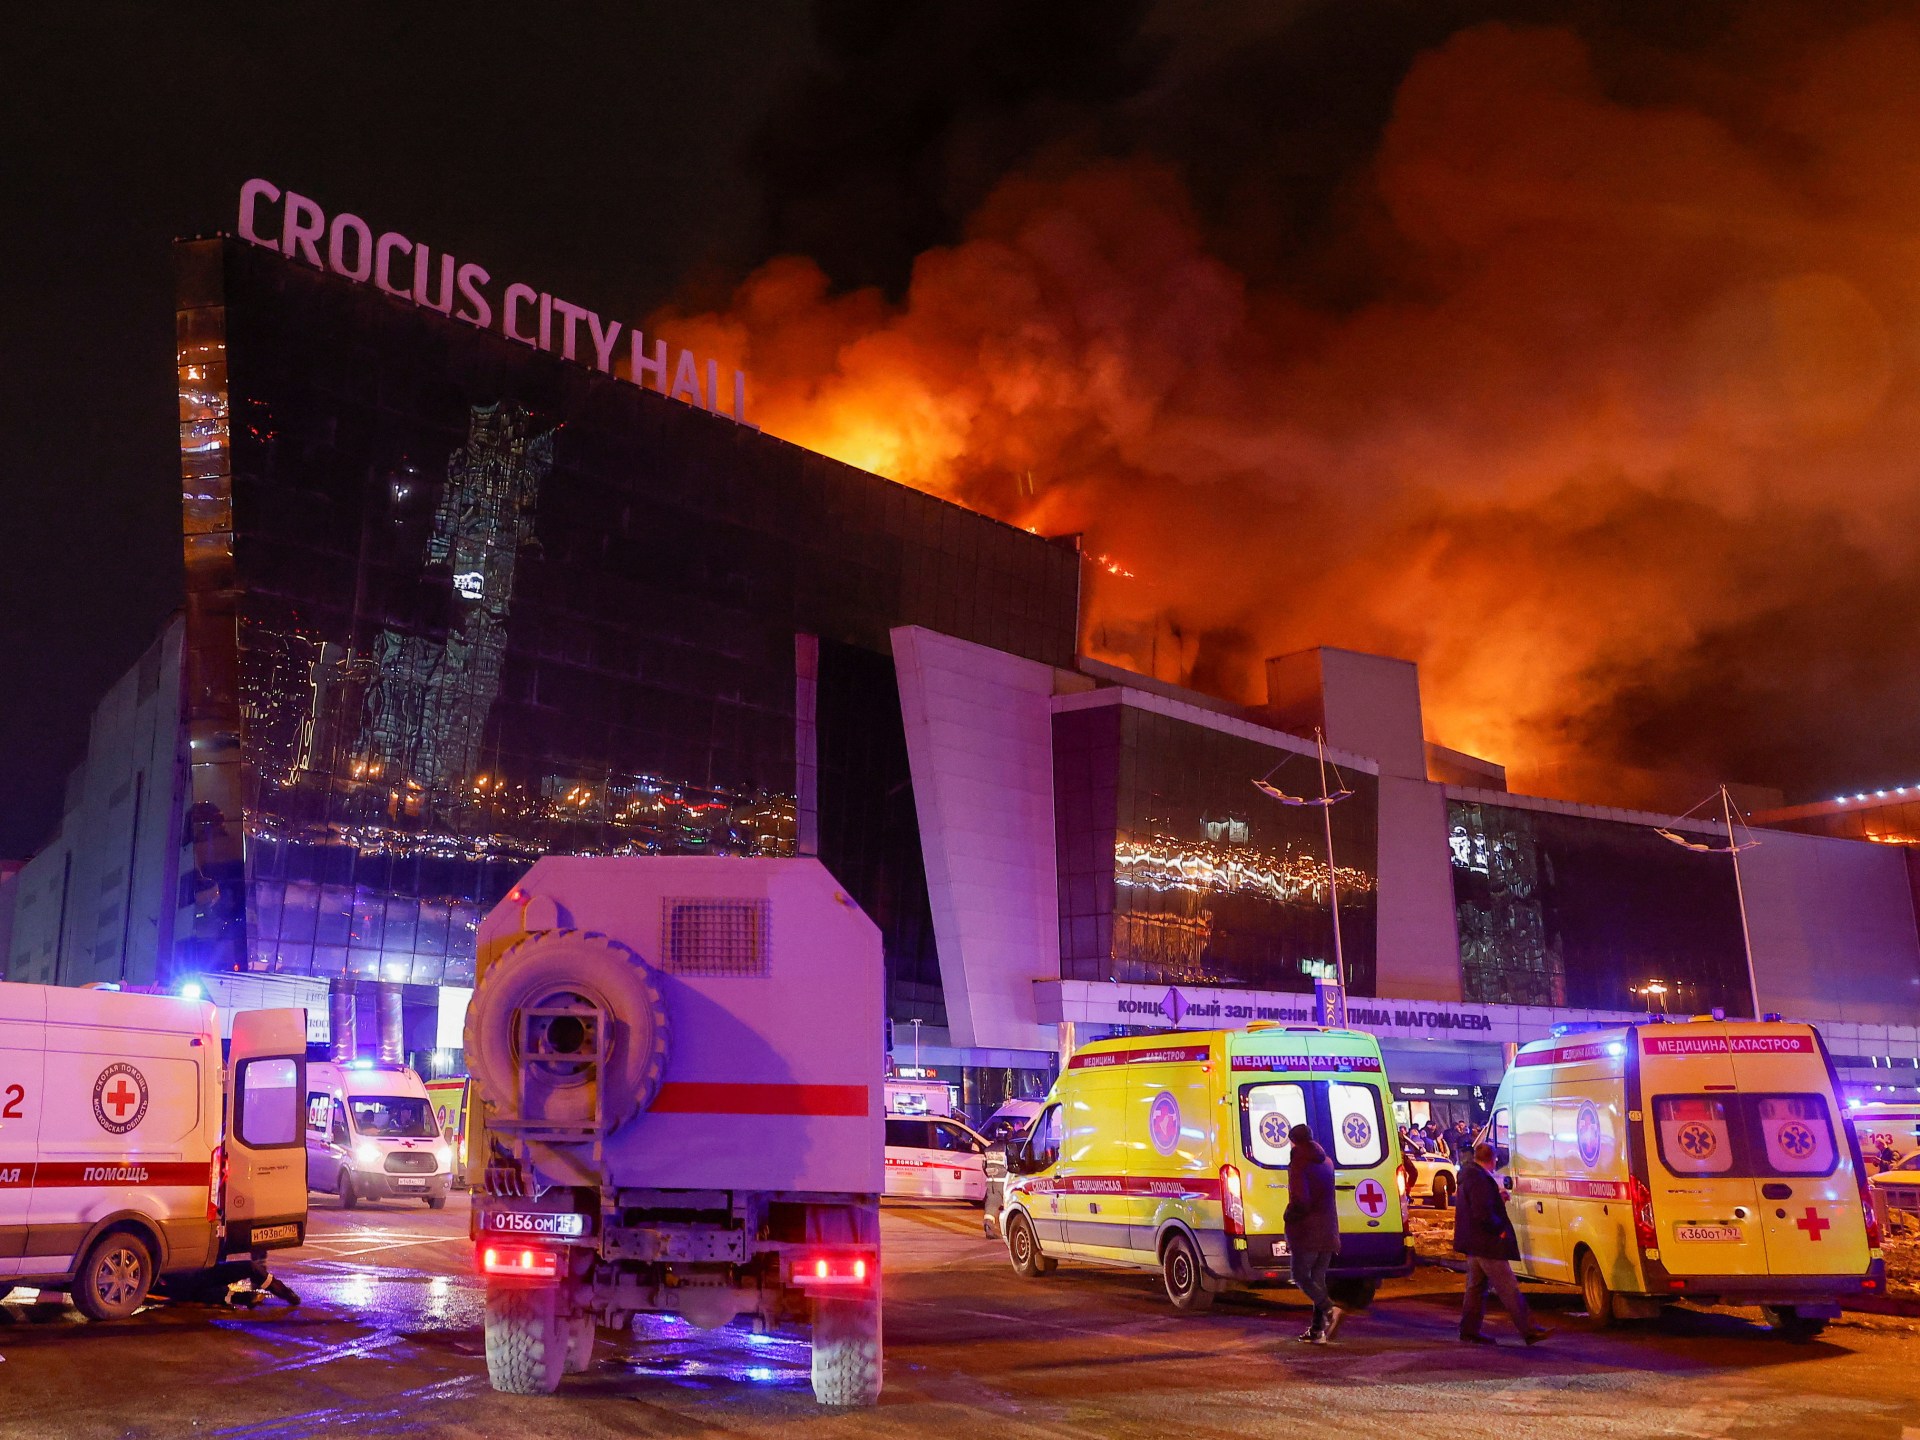 World reaction to the attacks on Moscow’s Crocus City Hall